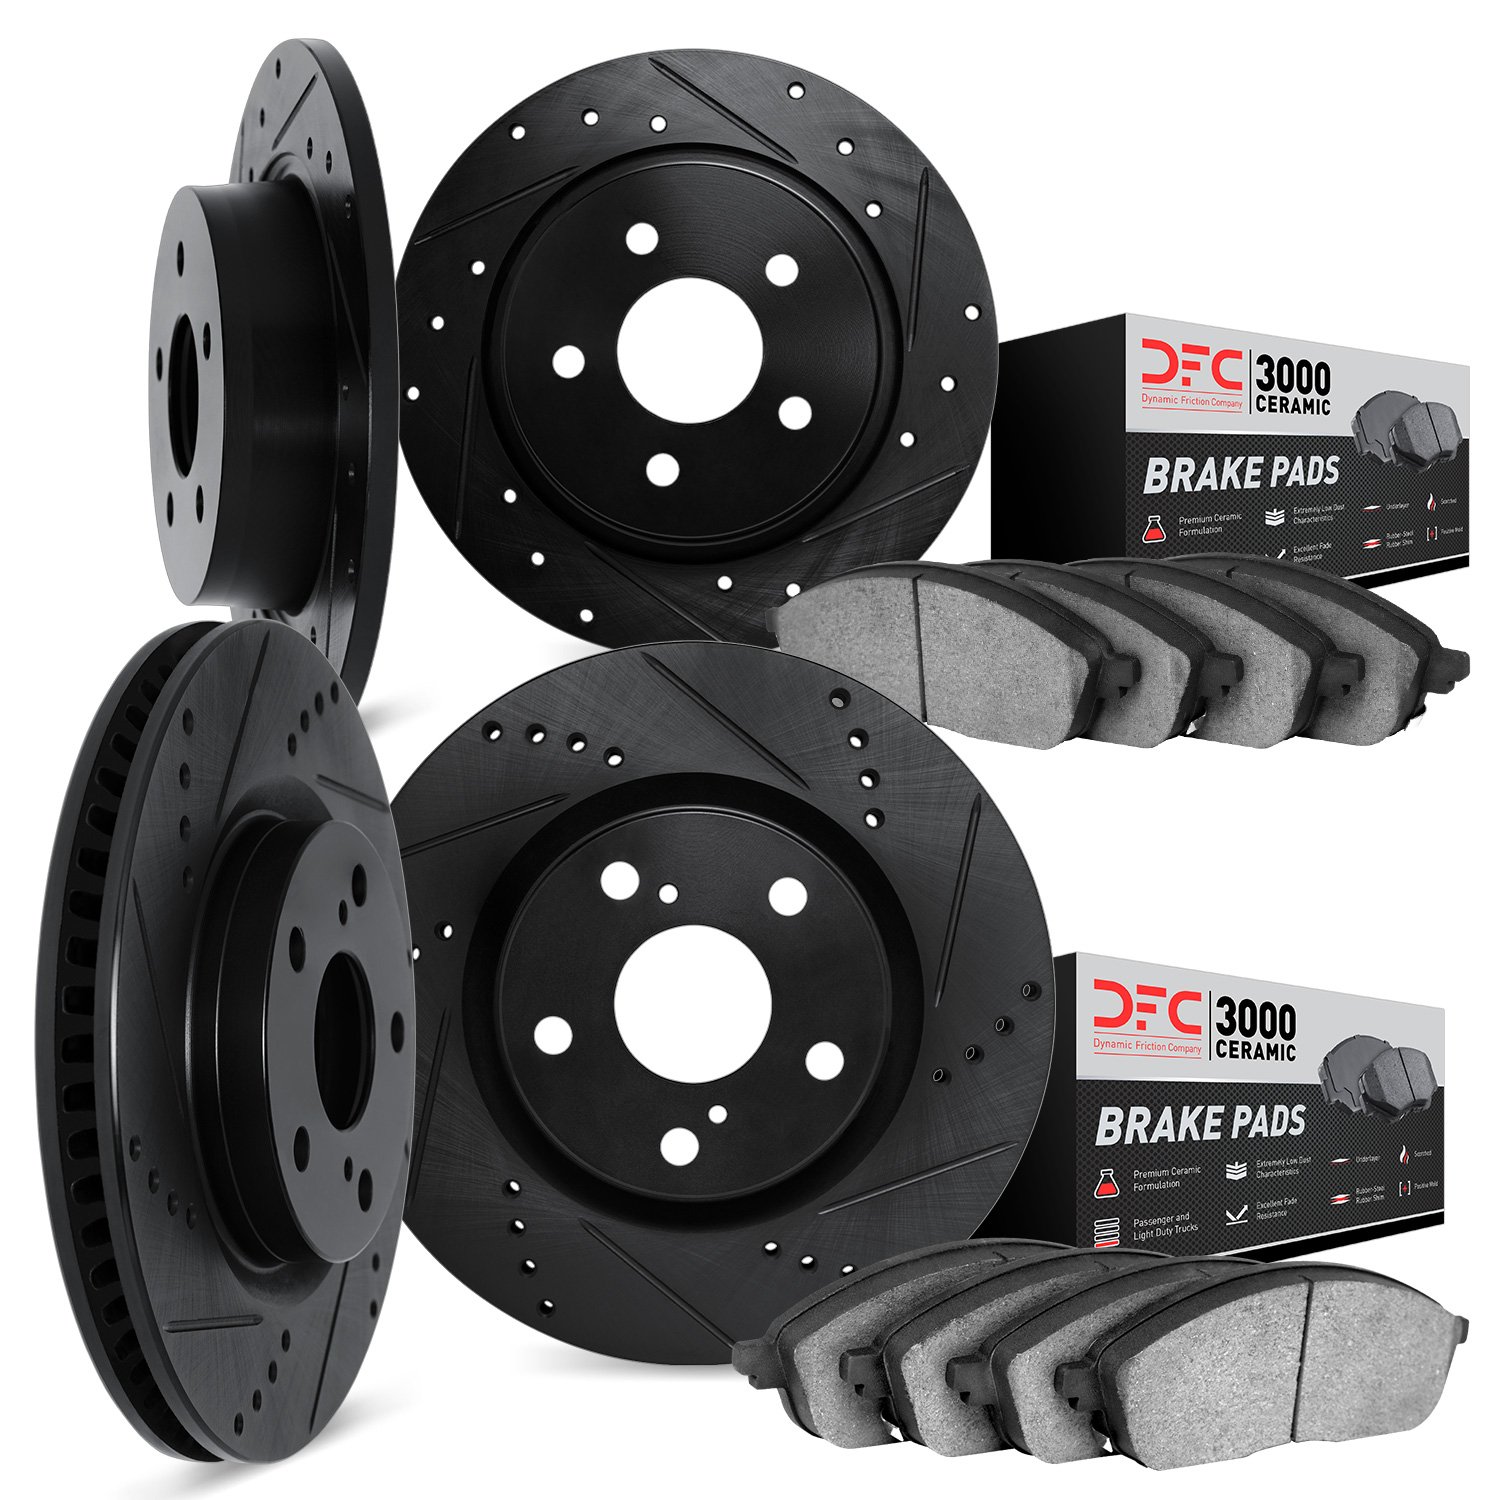 8304-59071 Drilled/Slotted Brake Rotors with 3000-Series Ceramic Brake Pads Kit [Black], 2009-2014 Acura/Honda, Position: Front